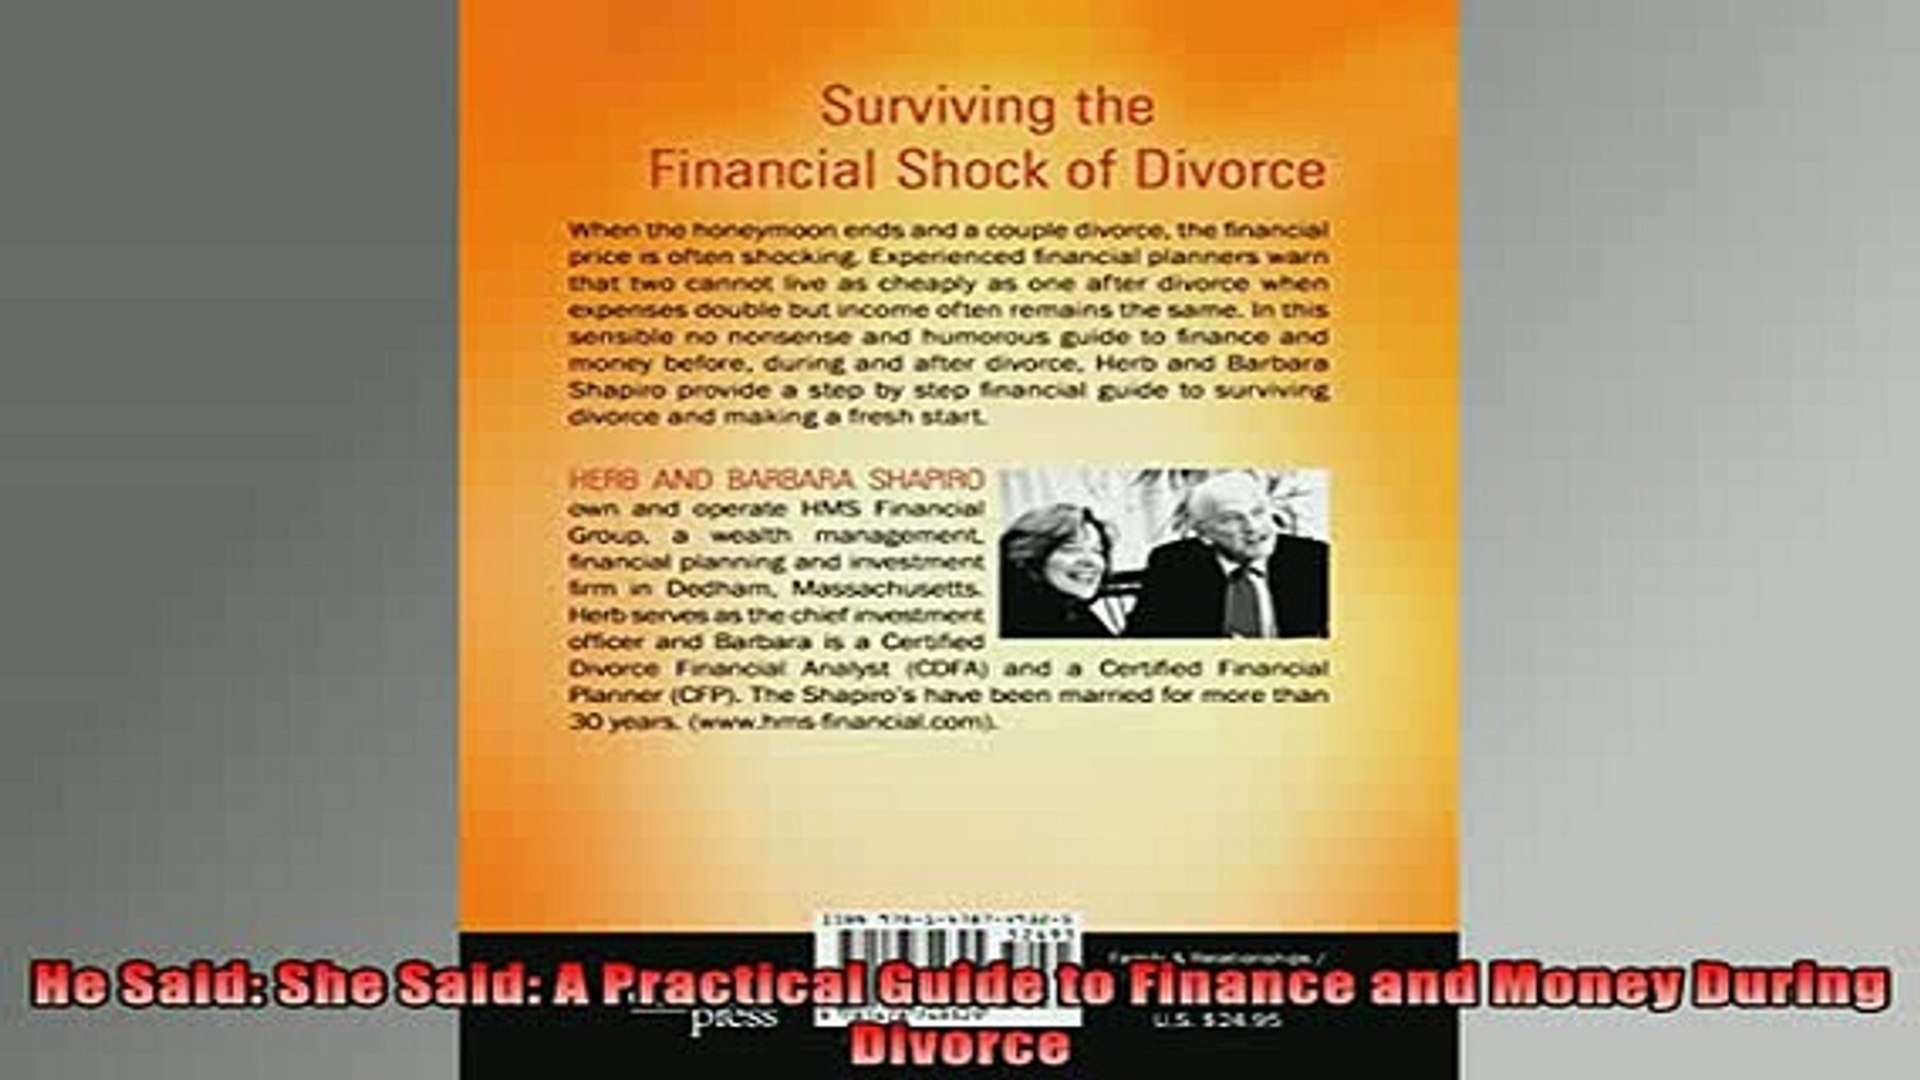 Free Pdf Downlaod He Said She Said A Practical Guide To Finance And Money During Divorce Book Online Video Dailymotion